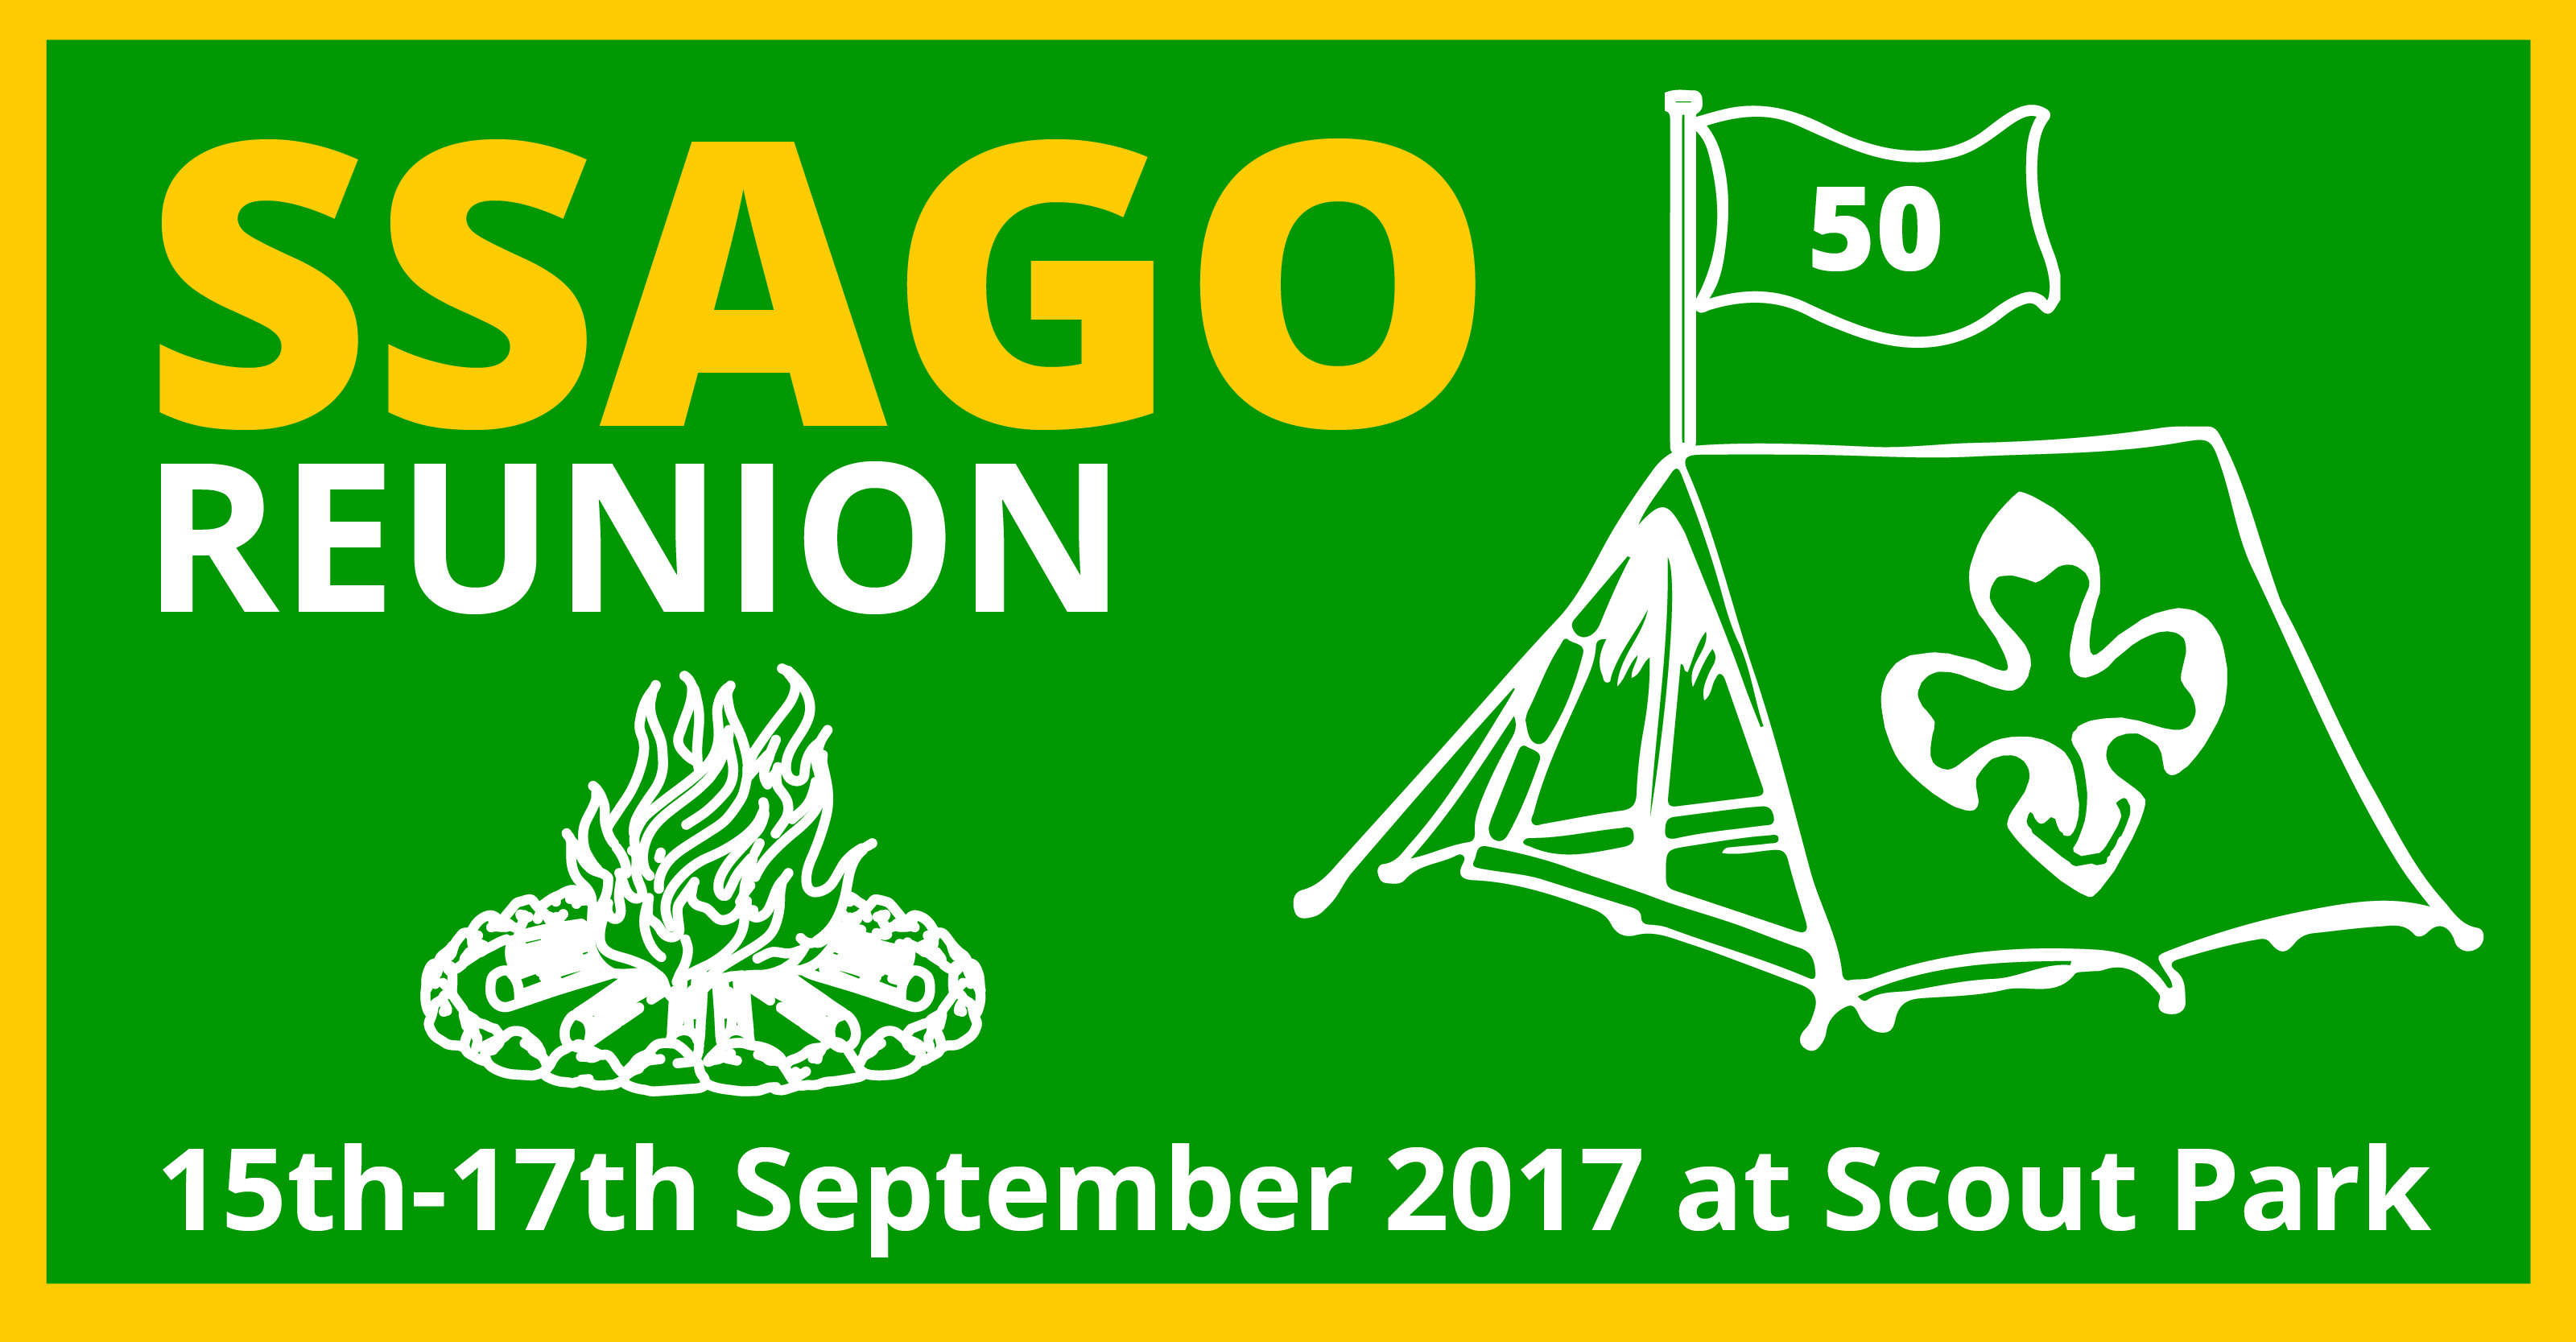 SSAGO Reunion and 50th Anniversary